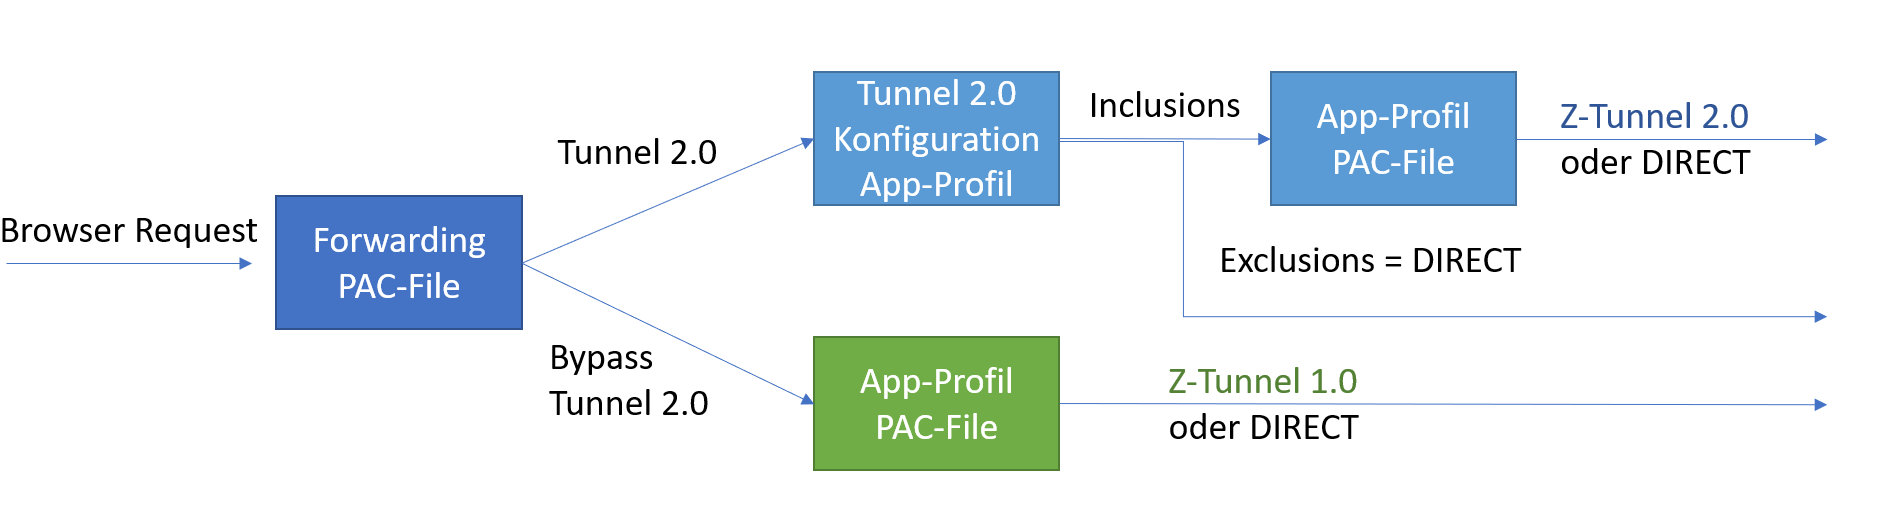 Forwarding ohne die Features «Redirect Web Traffic to Zscaler Client Connector Listening Proxy» und «Use Z-Tunnel 2.0 for Proxied Web Traffic»